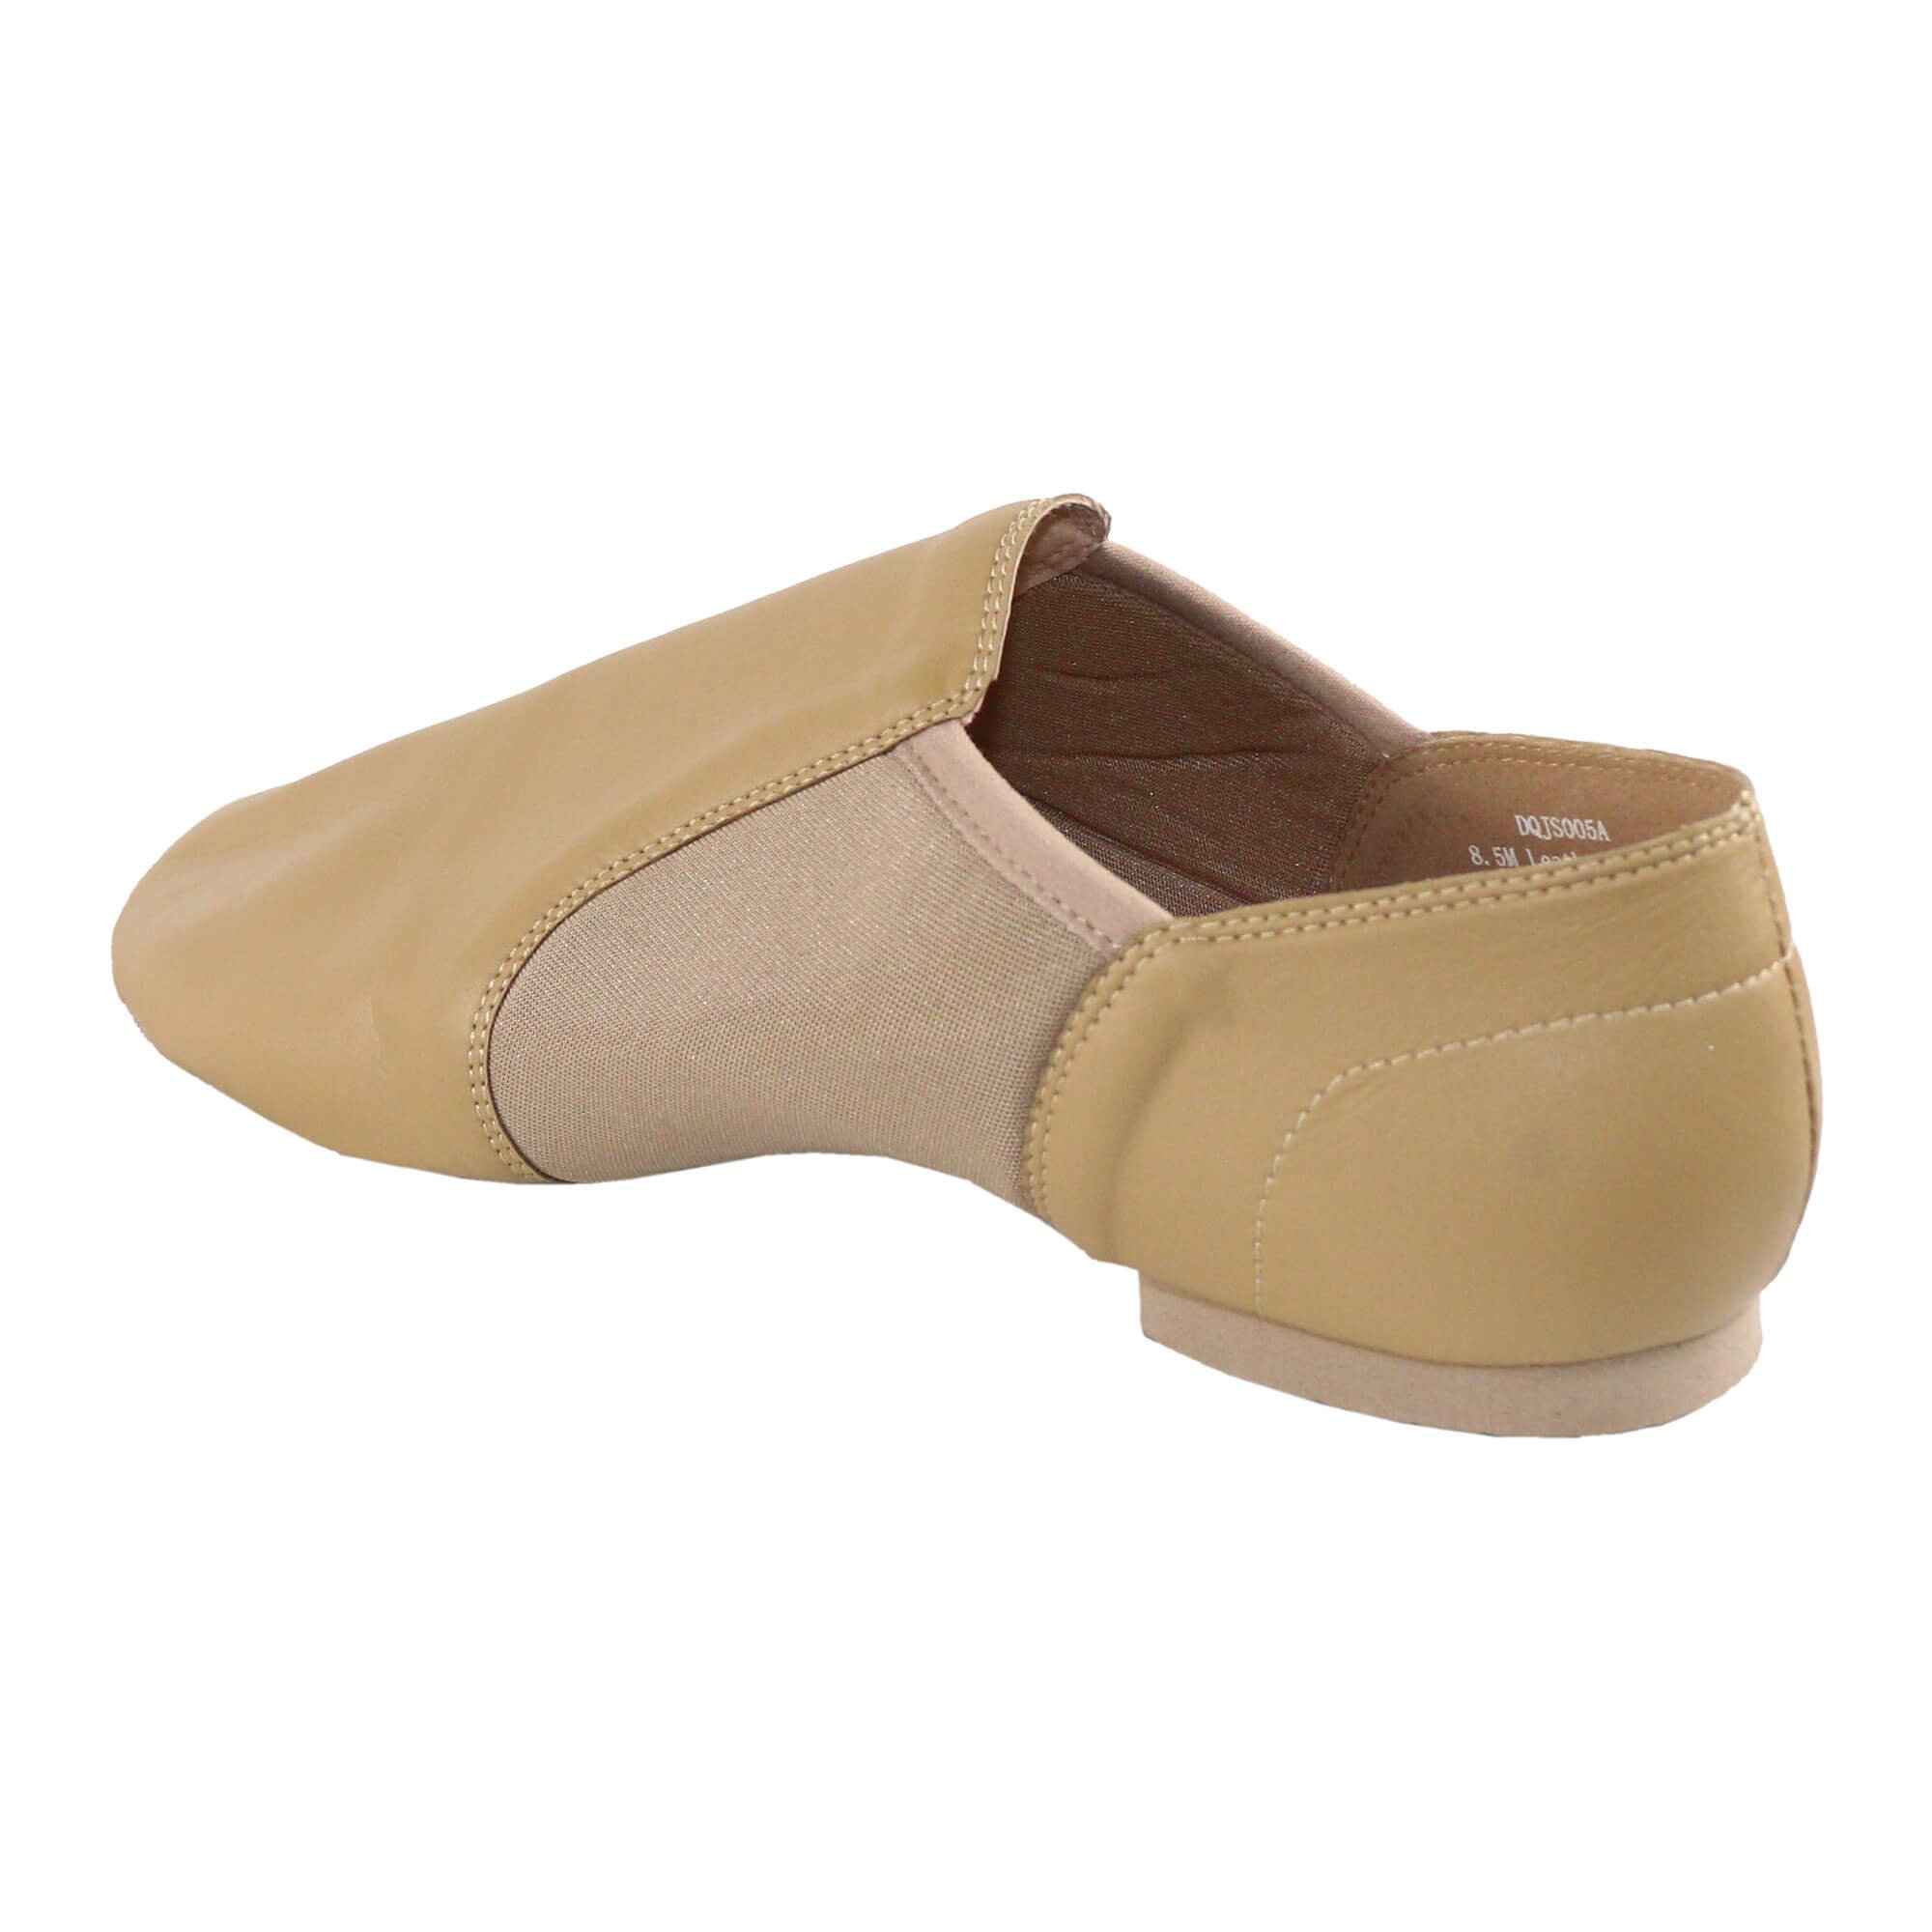 Danzcue Adult Leather Upper Slip-On Jazz Dance Shoes - Click Image to Close